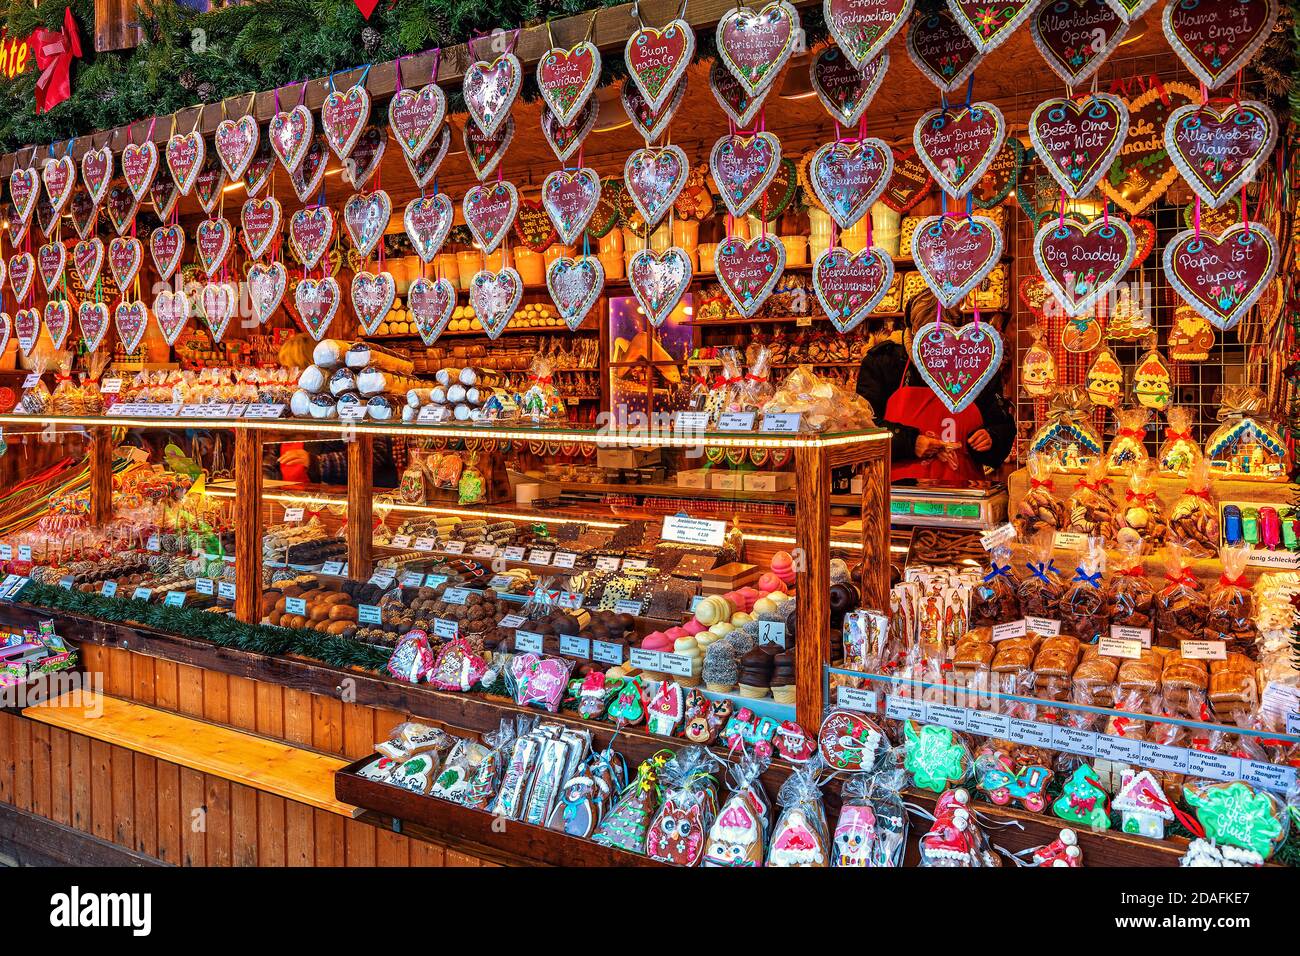 Heart-shaped gingerbread cookies, traditional sweets and candies at famous Christmas market in Vienna, Austria. Stock Photo